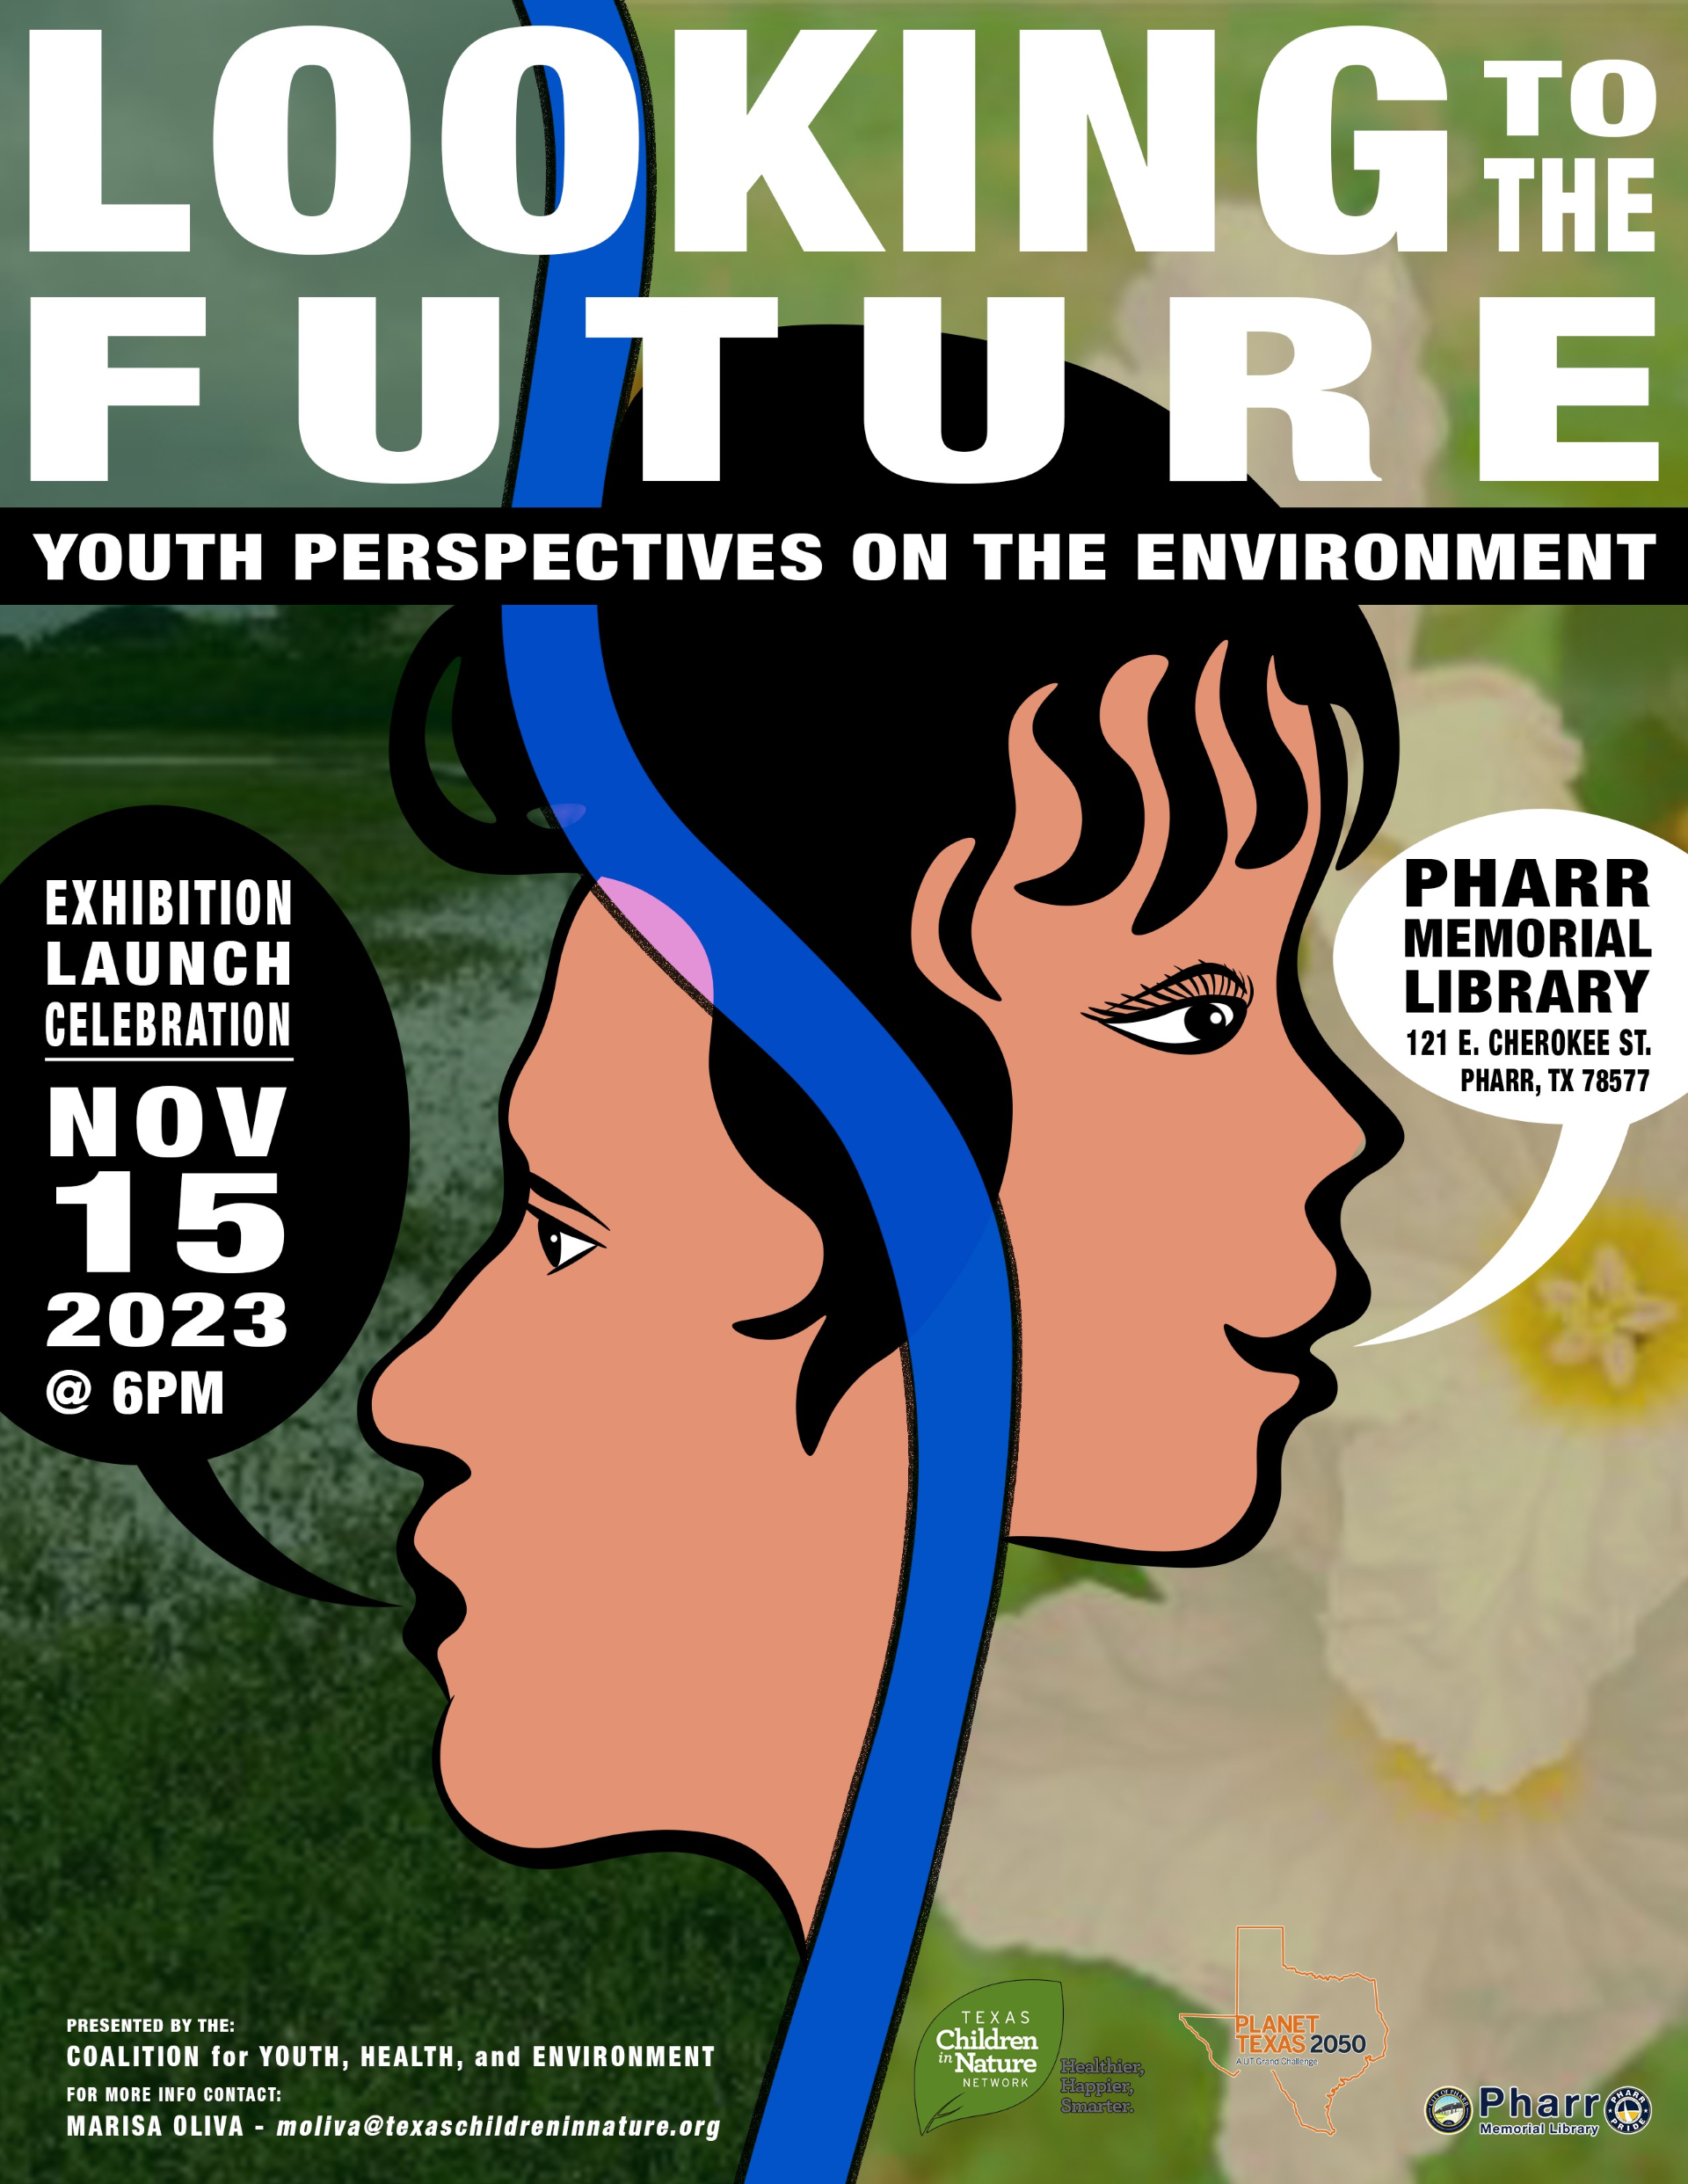 "Looking to the Future" promotional poster